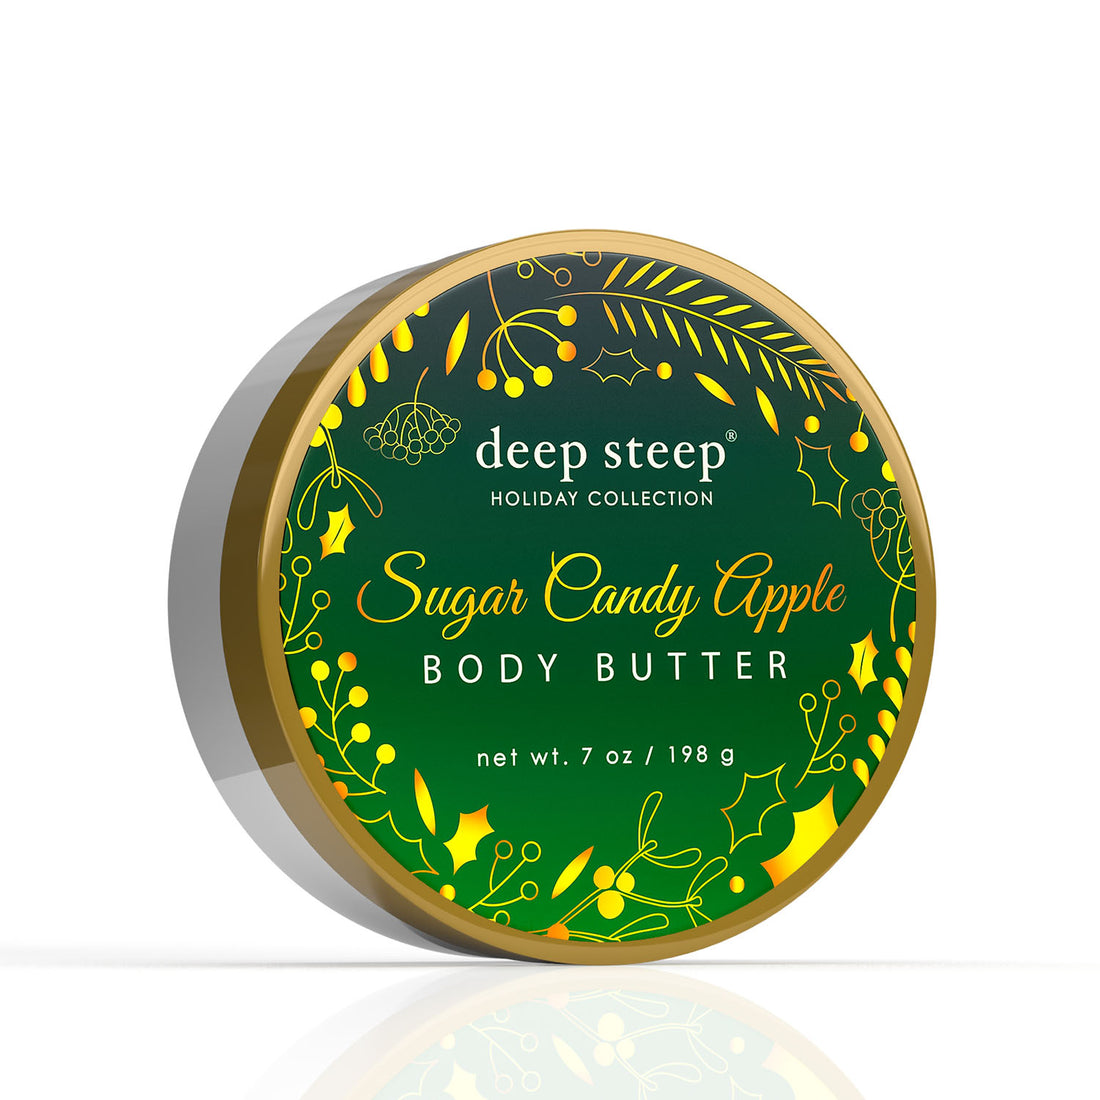 Holiday Body Butter - Sugar Candy Apple